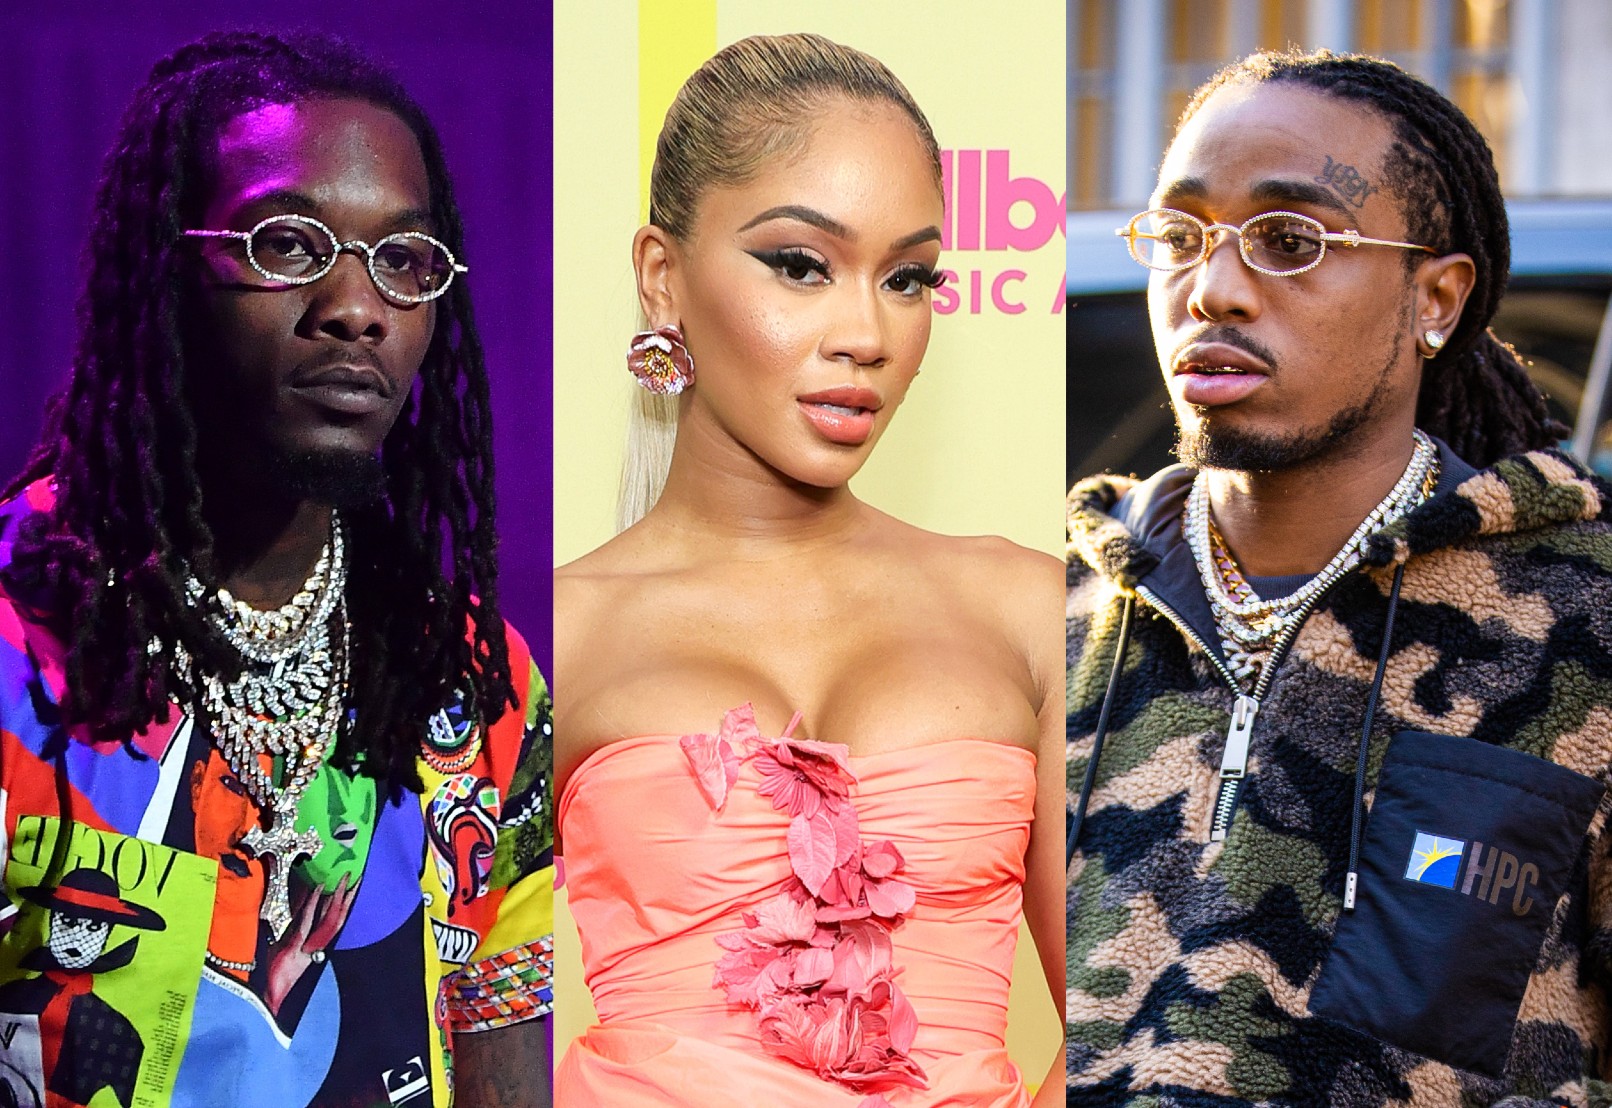 Saweetie & Offset: What Supposedly Happened?